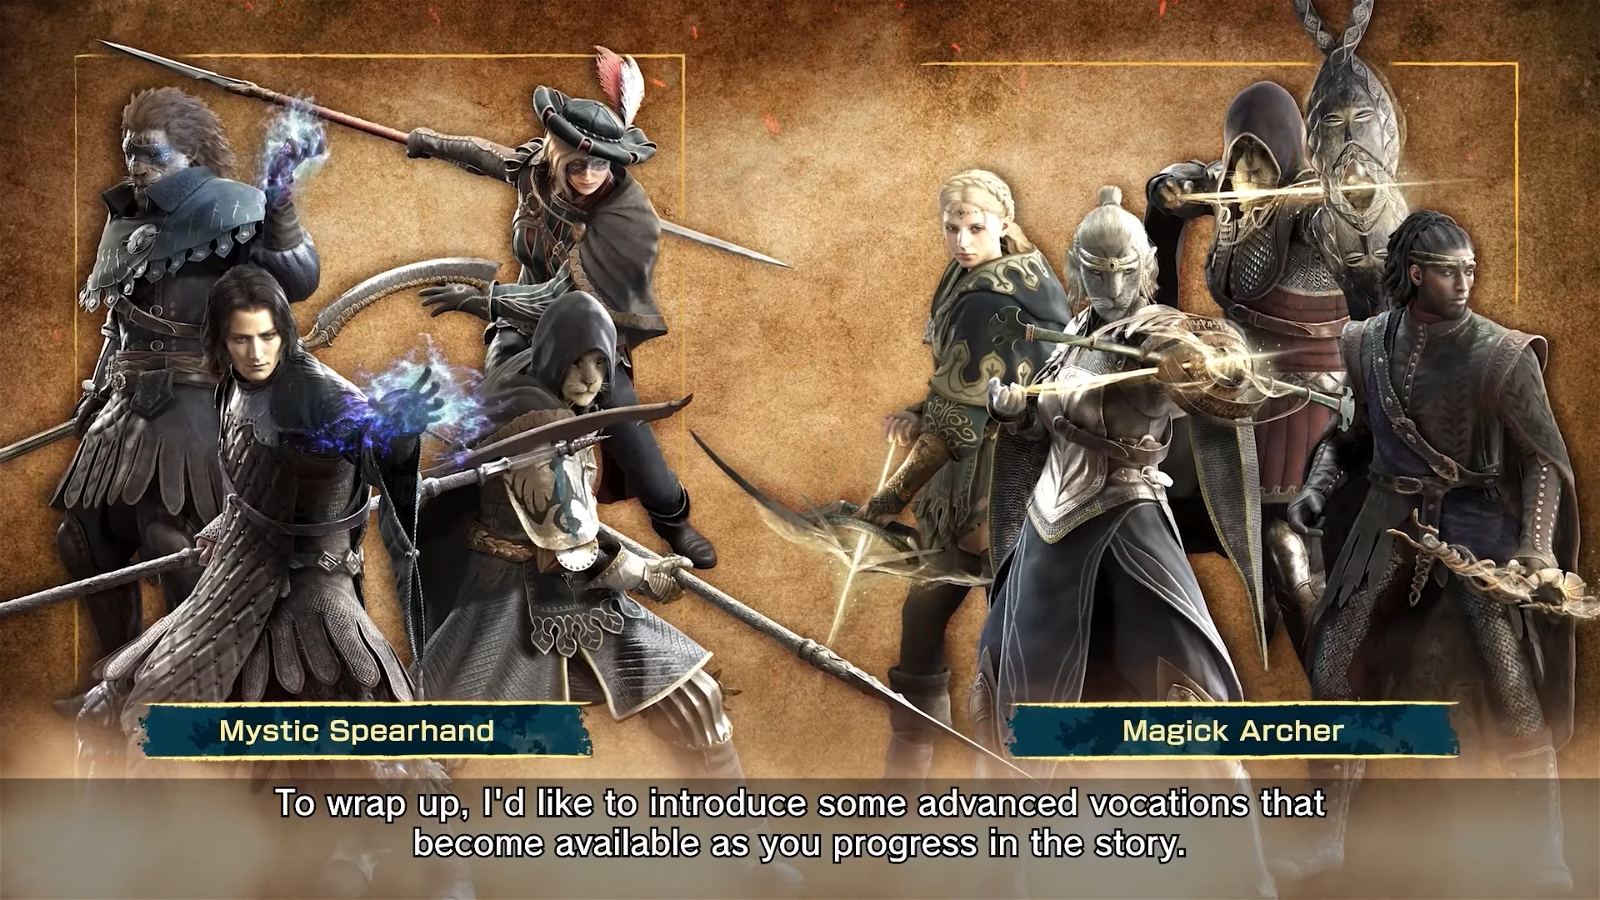 Screengrab from the gameplay demo showing the Advanced Vocations 